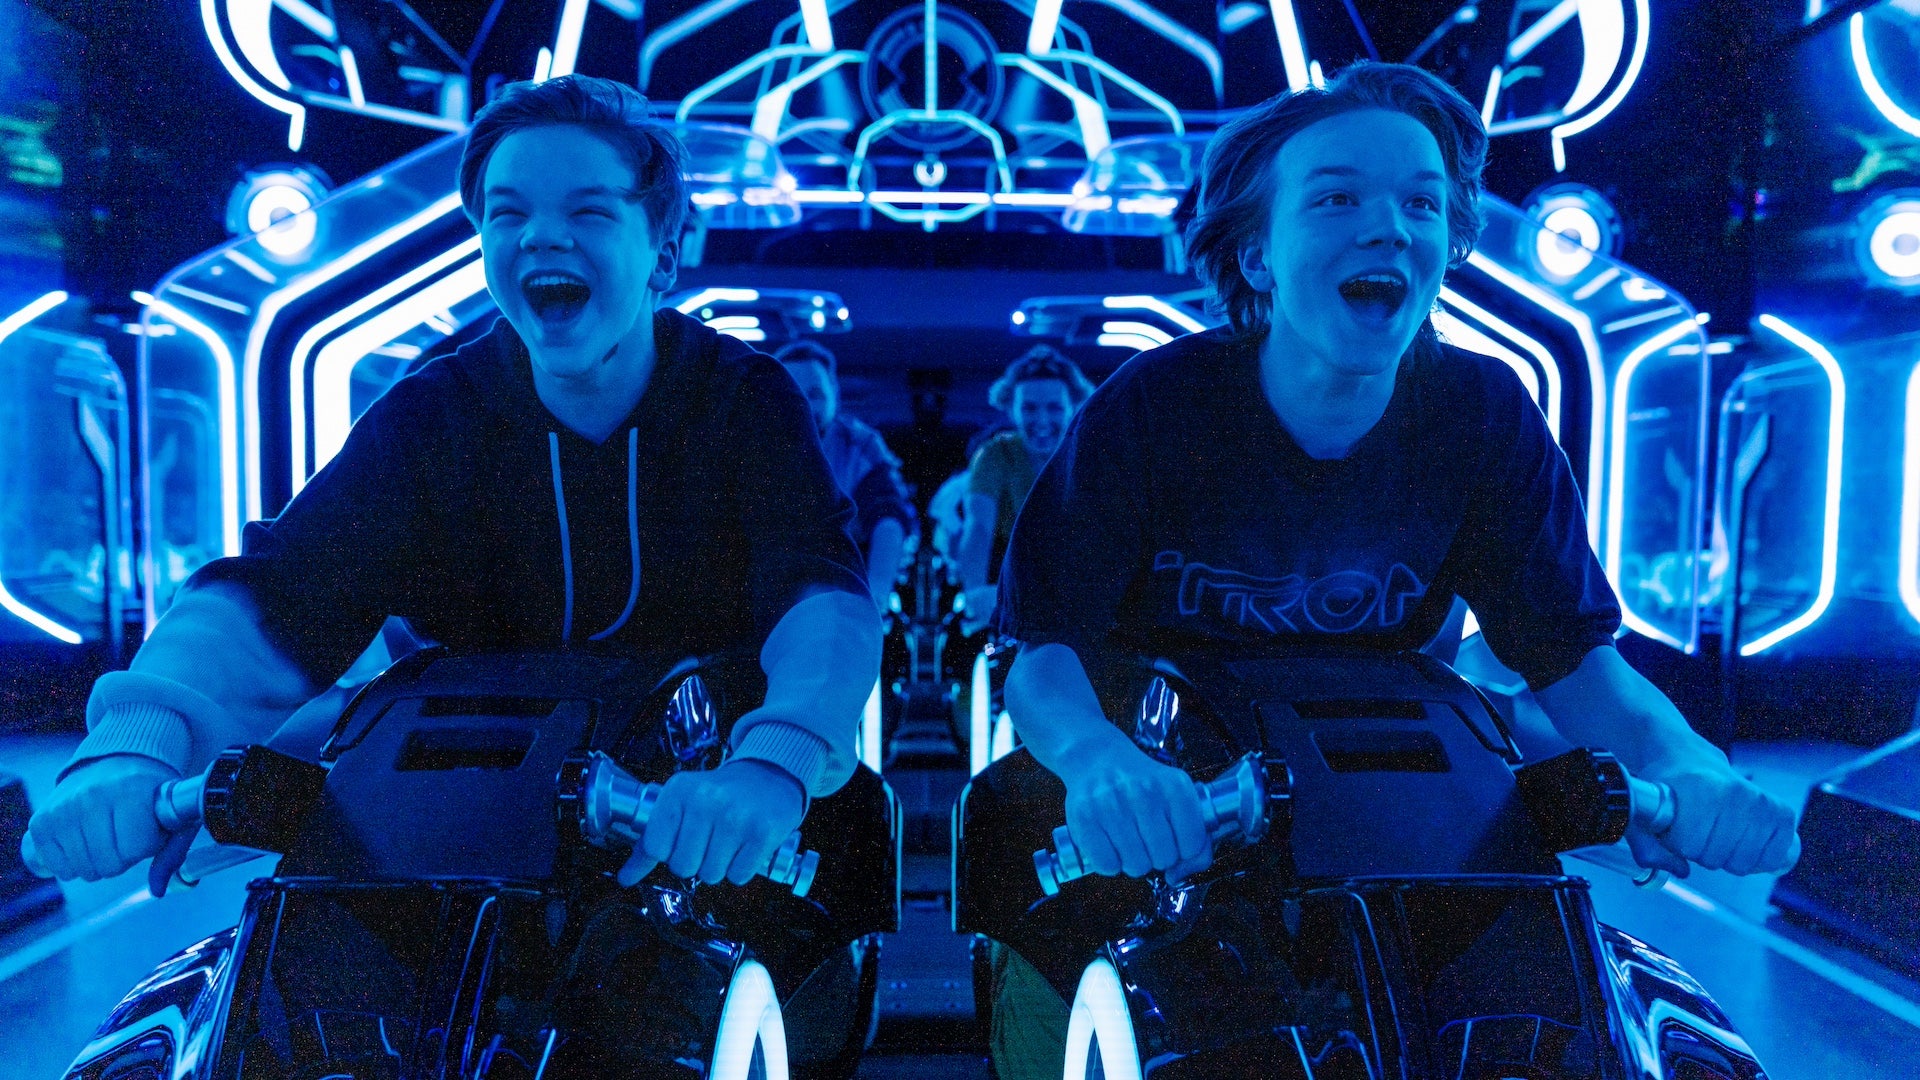 Up close shot of two boys inside the Tron ride about to take off